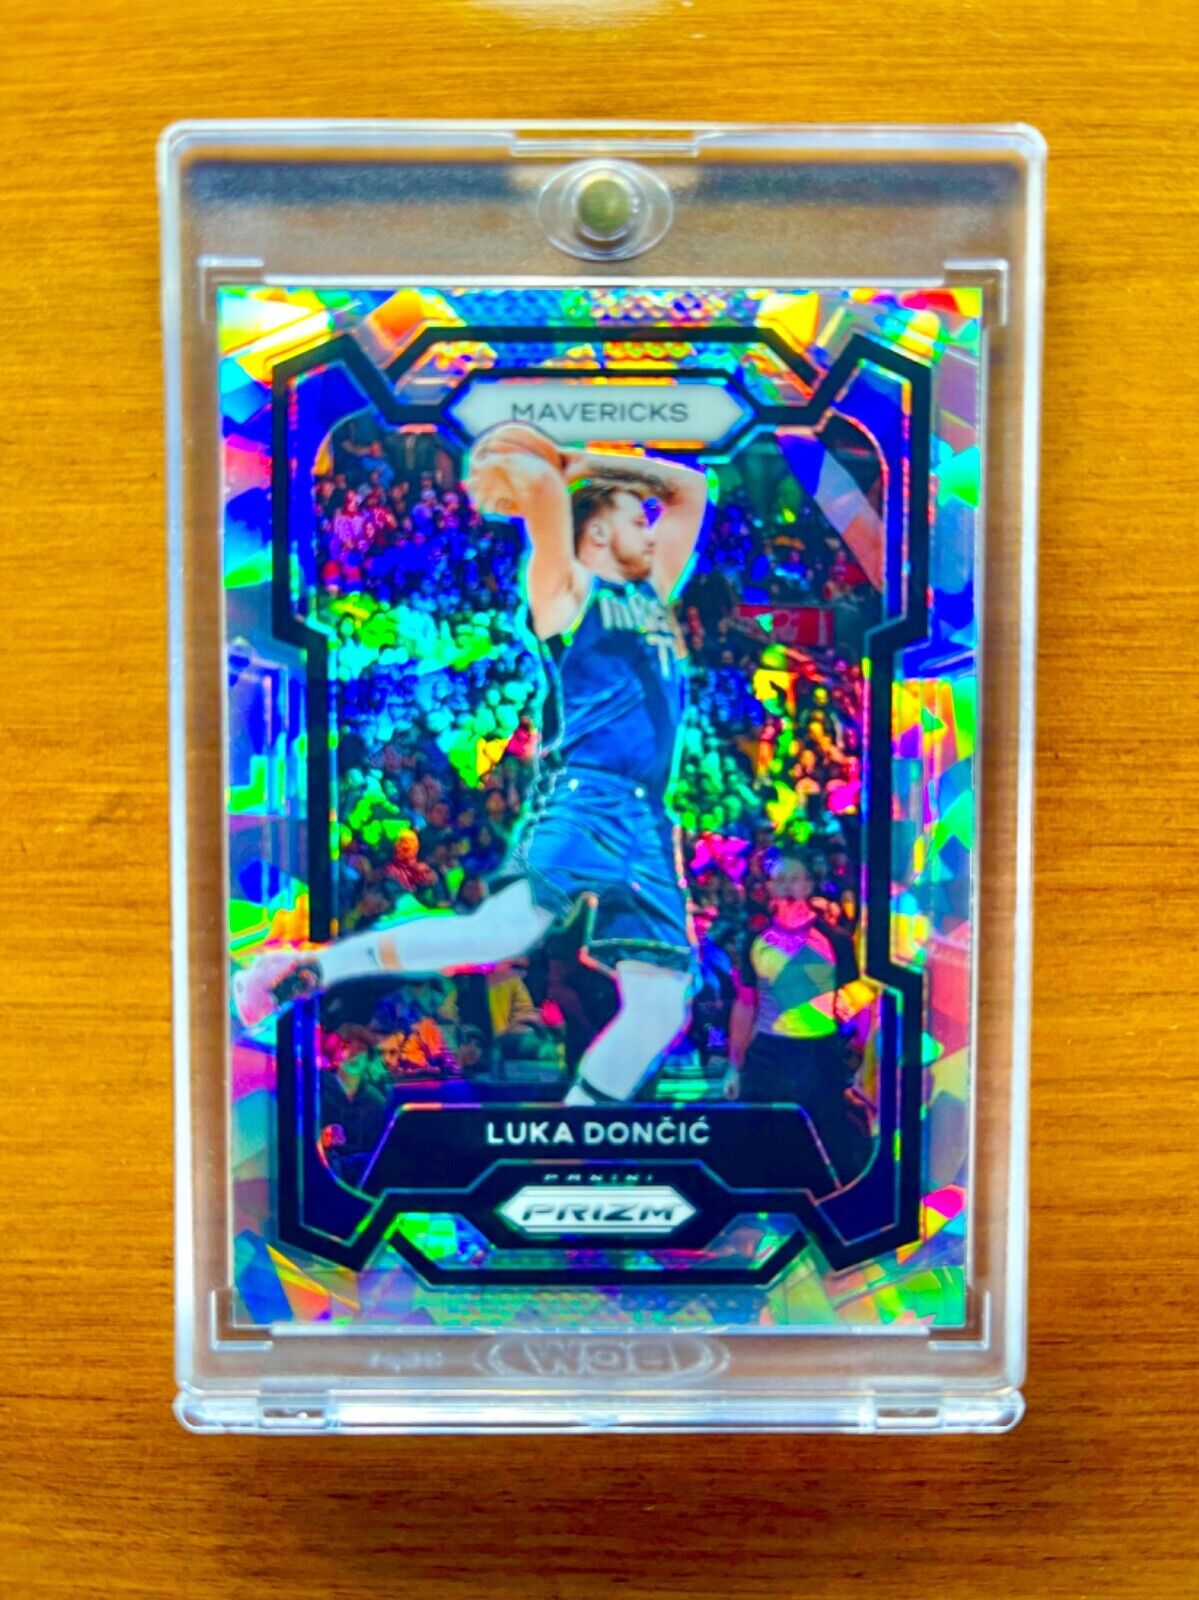 Luka Doncic RARE SILVER ICE REFRACTOR PRIZM INVESTMENT CARD SSP PANINI MVP MINT